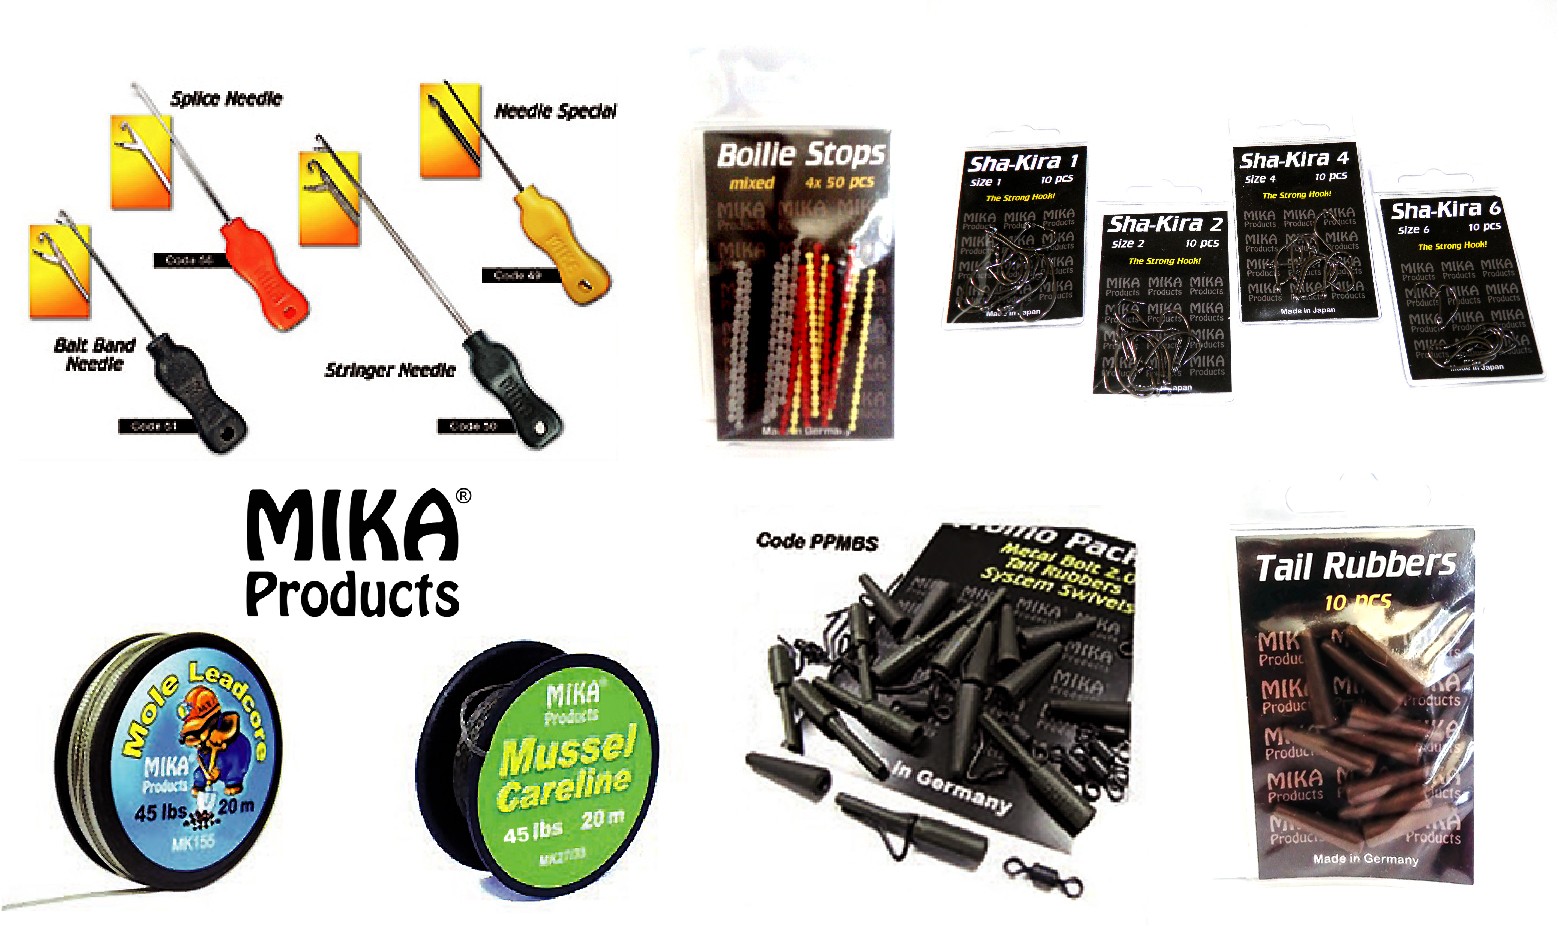  MIKA Products